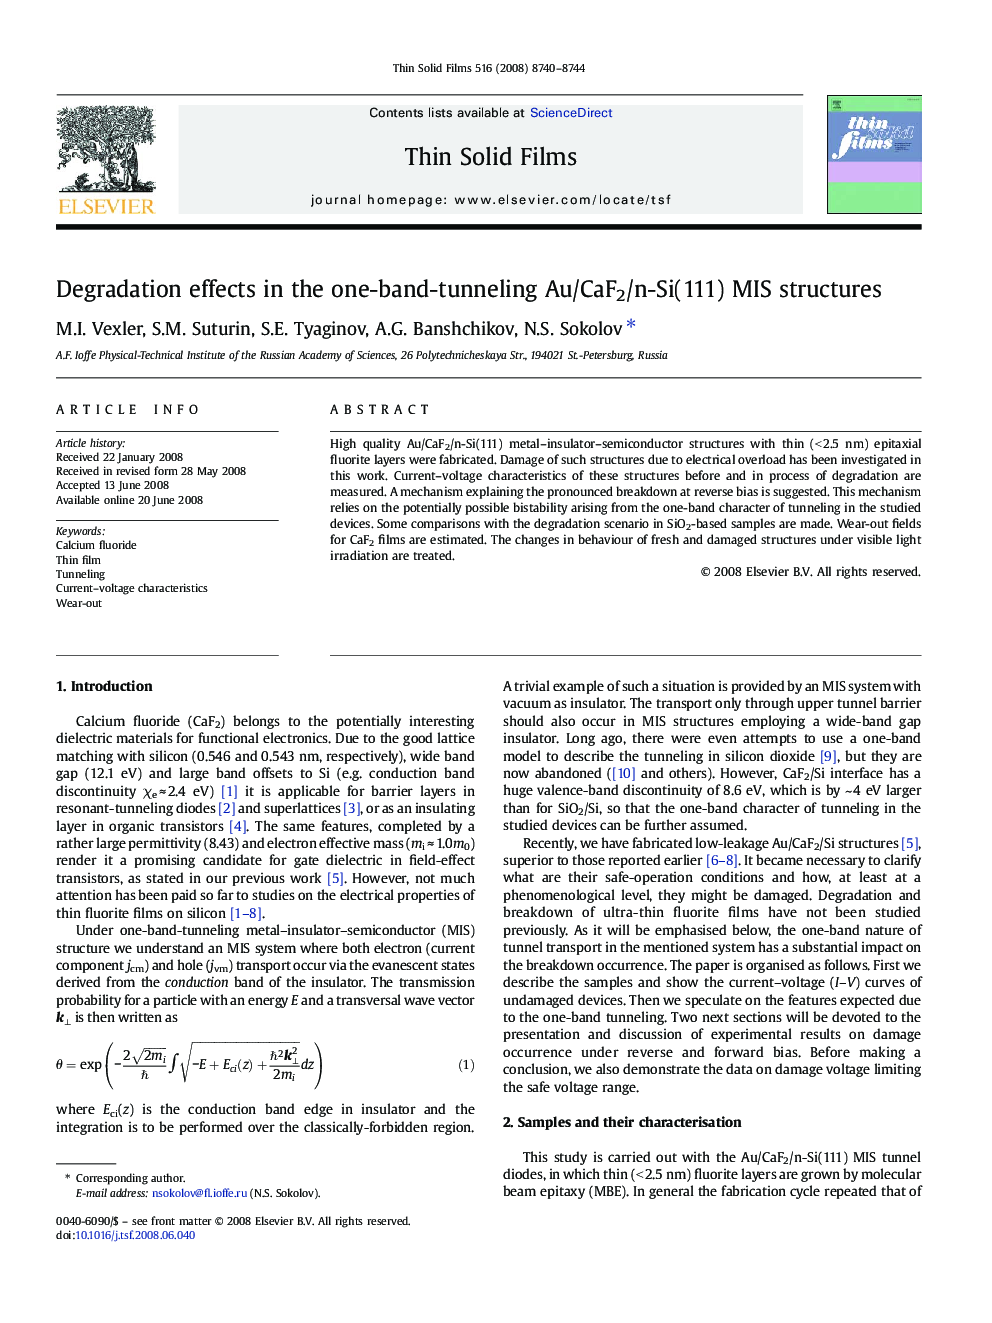 Degradation effects in the one-band-tunneling Au/CaF2/n-Si(111) MIS structures